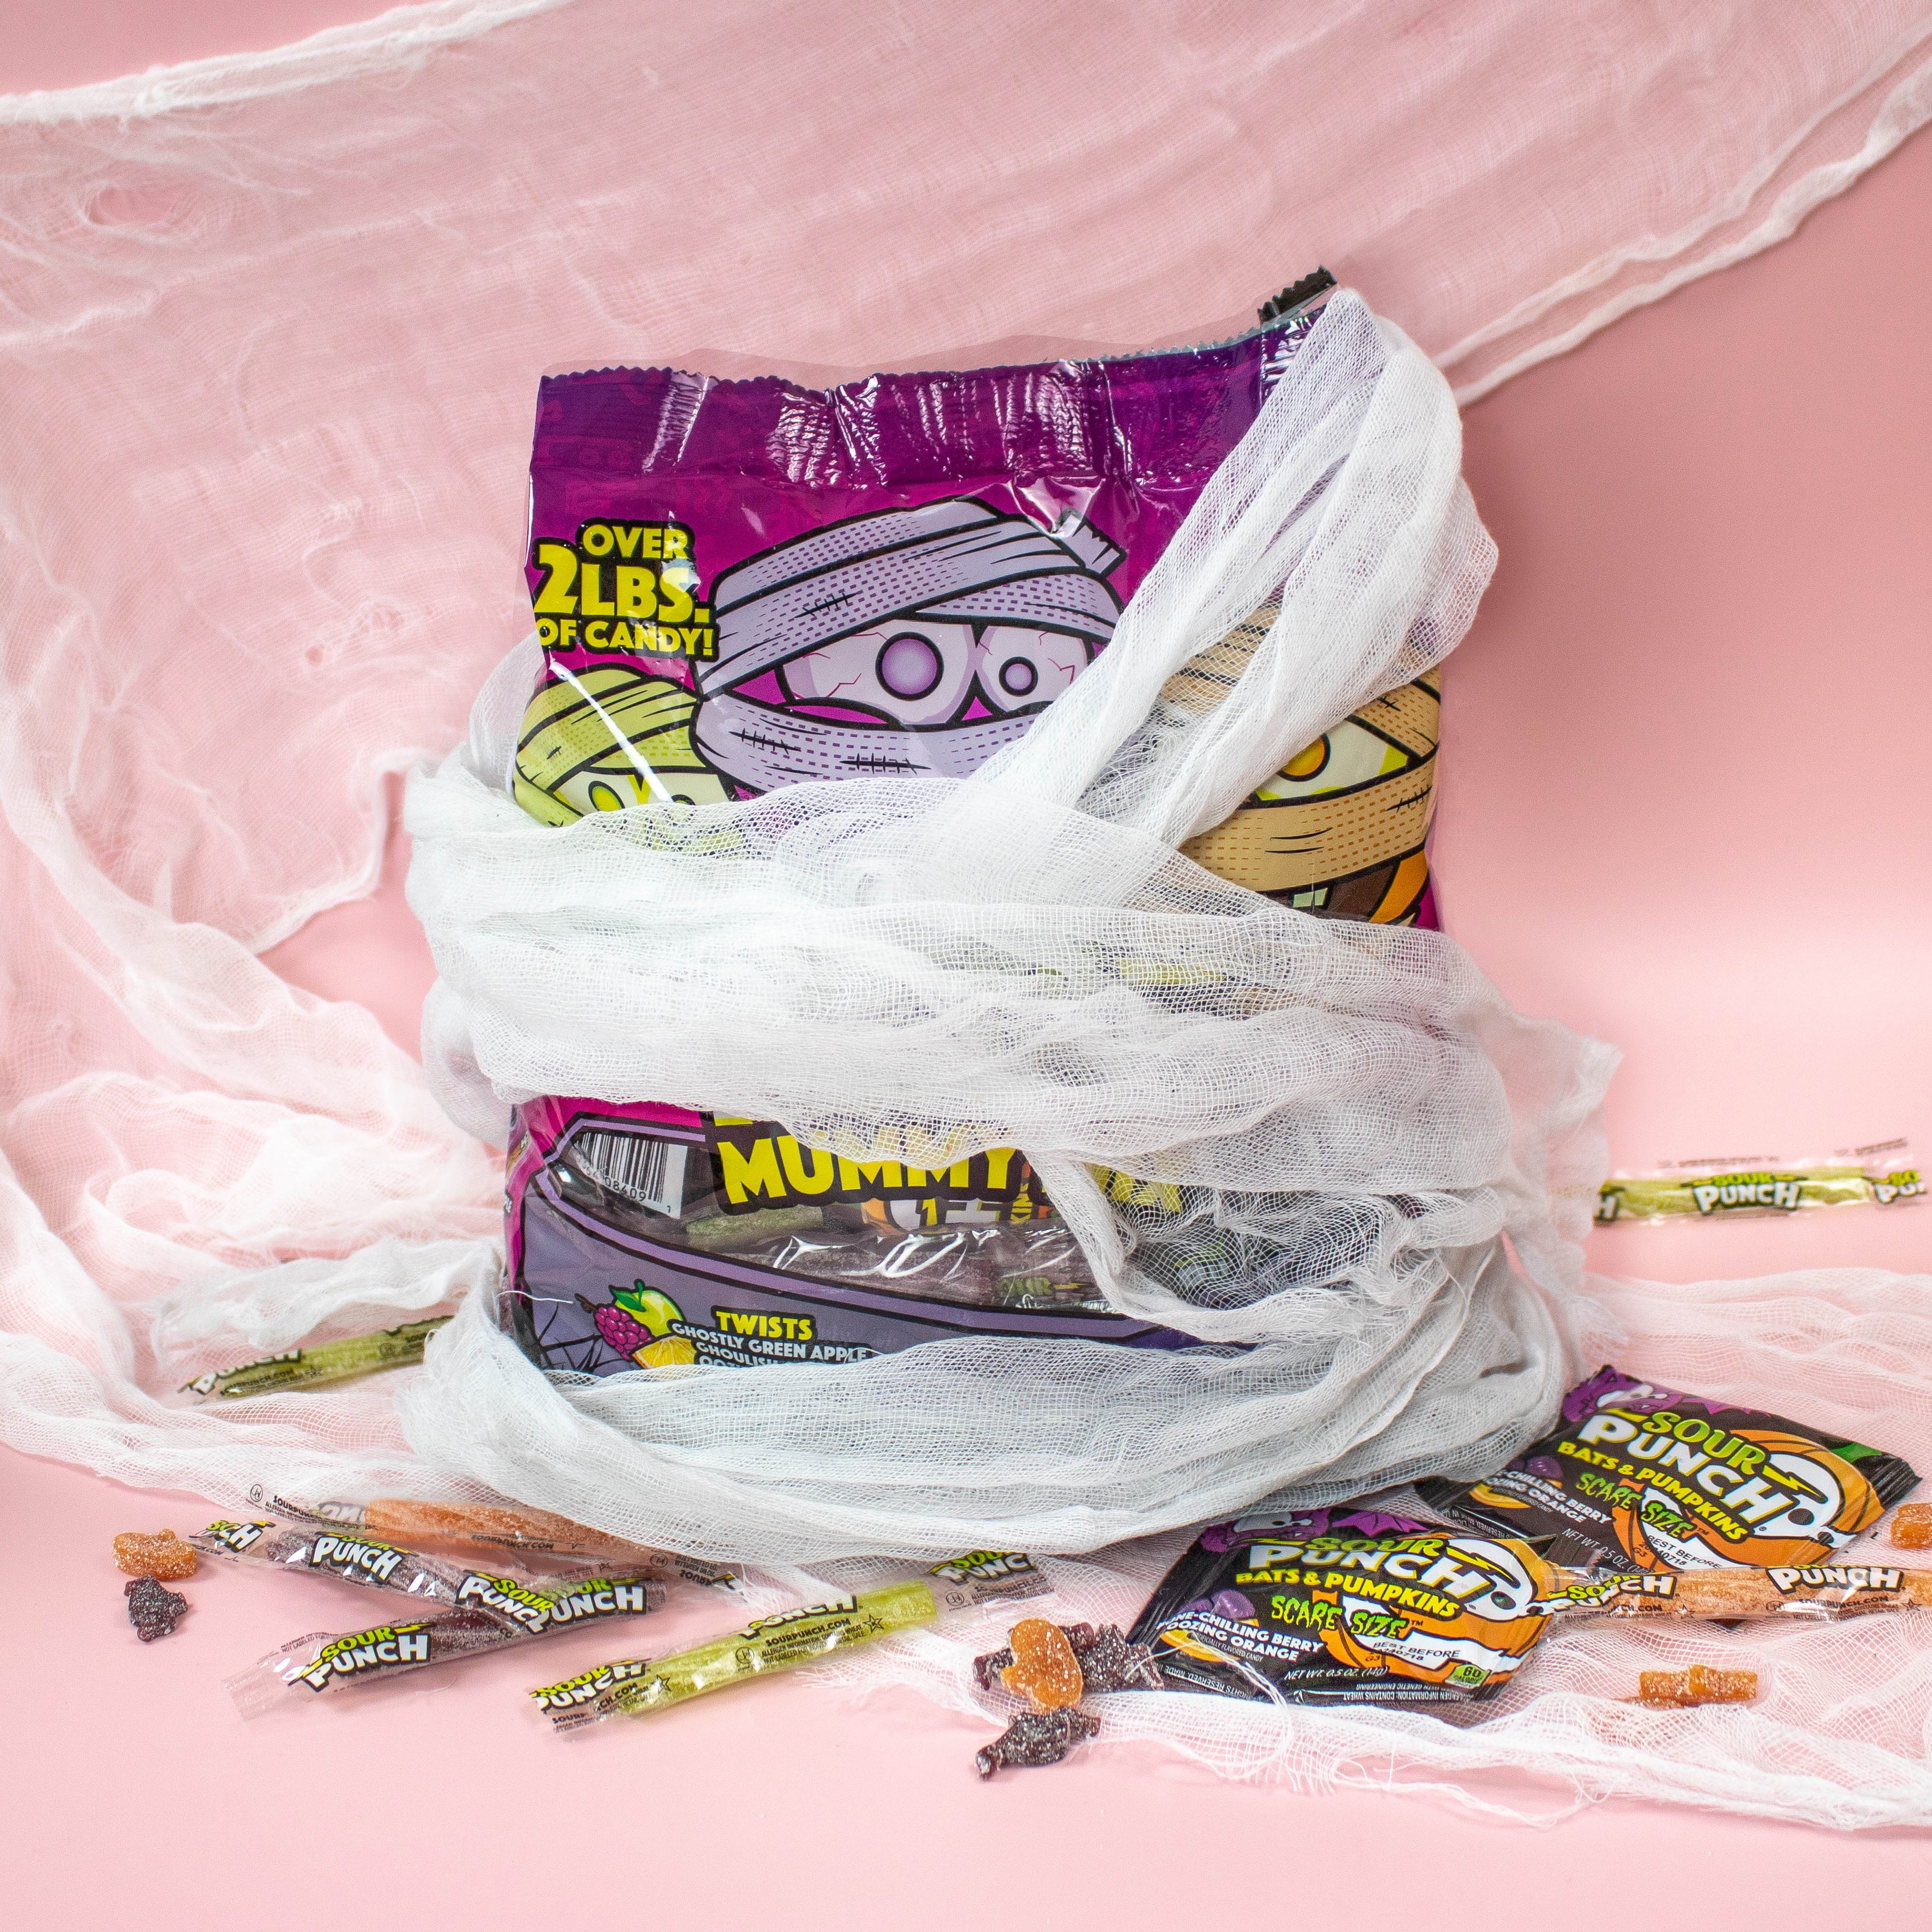 35oz Bag of SOUR PUNCH Mummy Mix Halloween Candy wrapped in cloth like a mummy